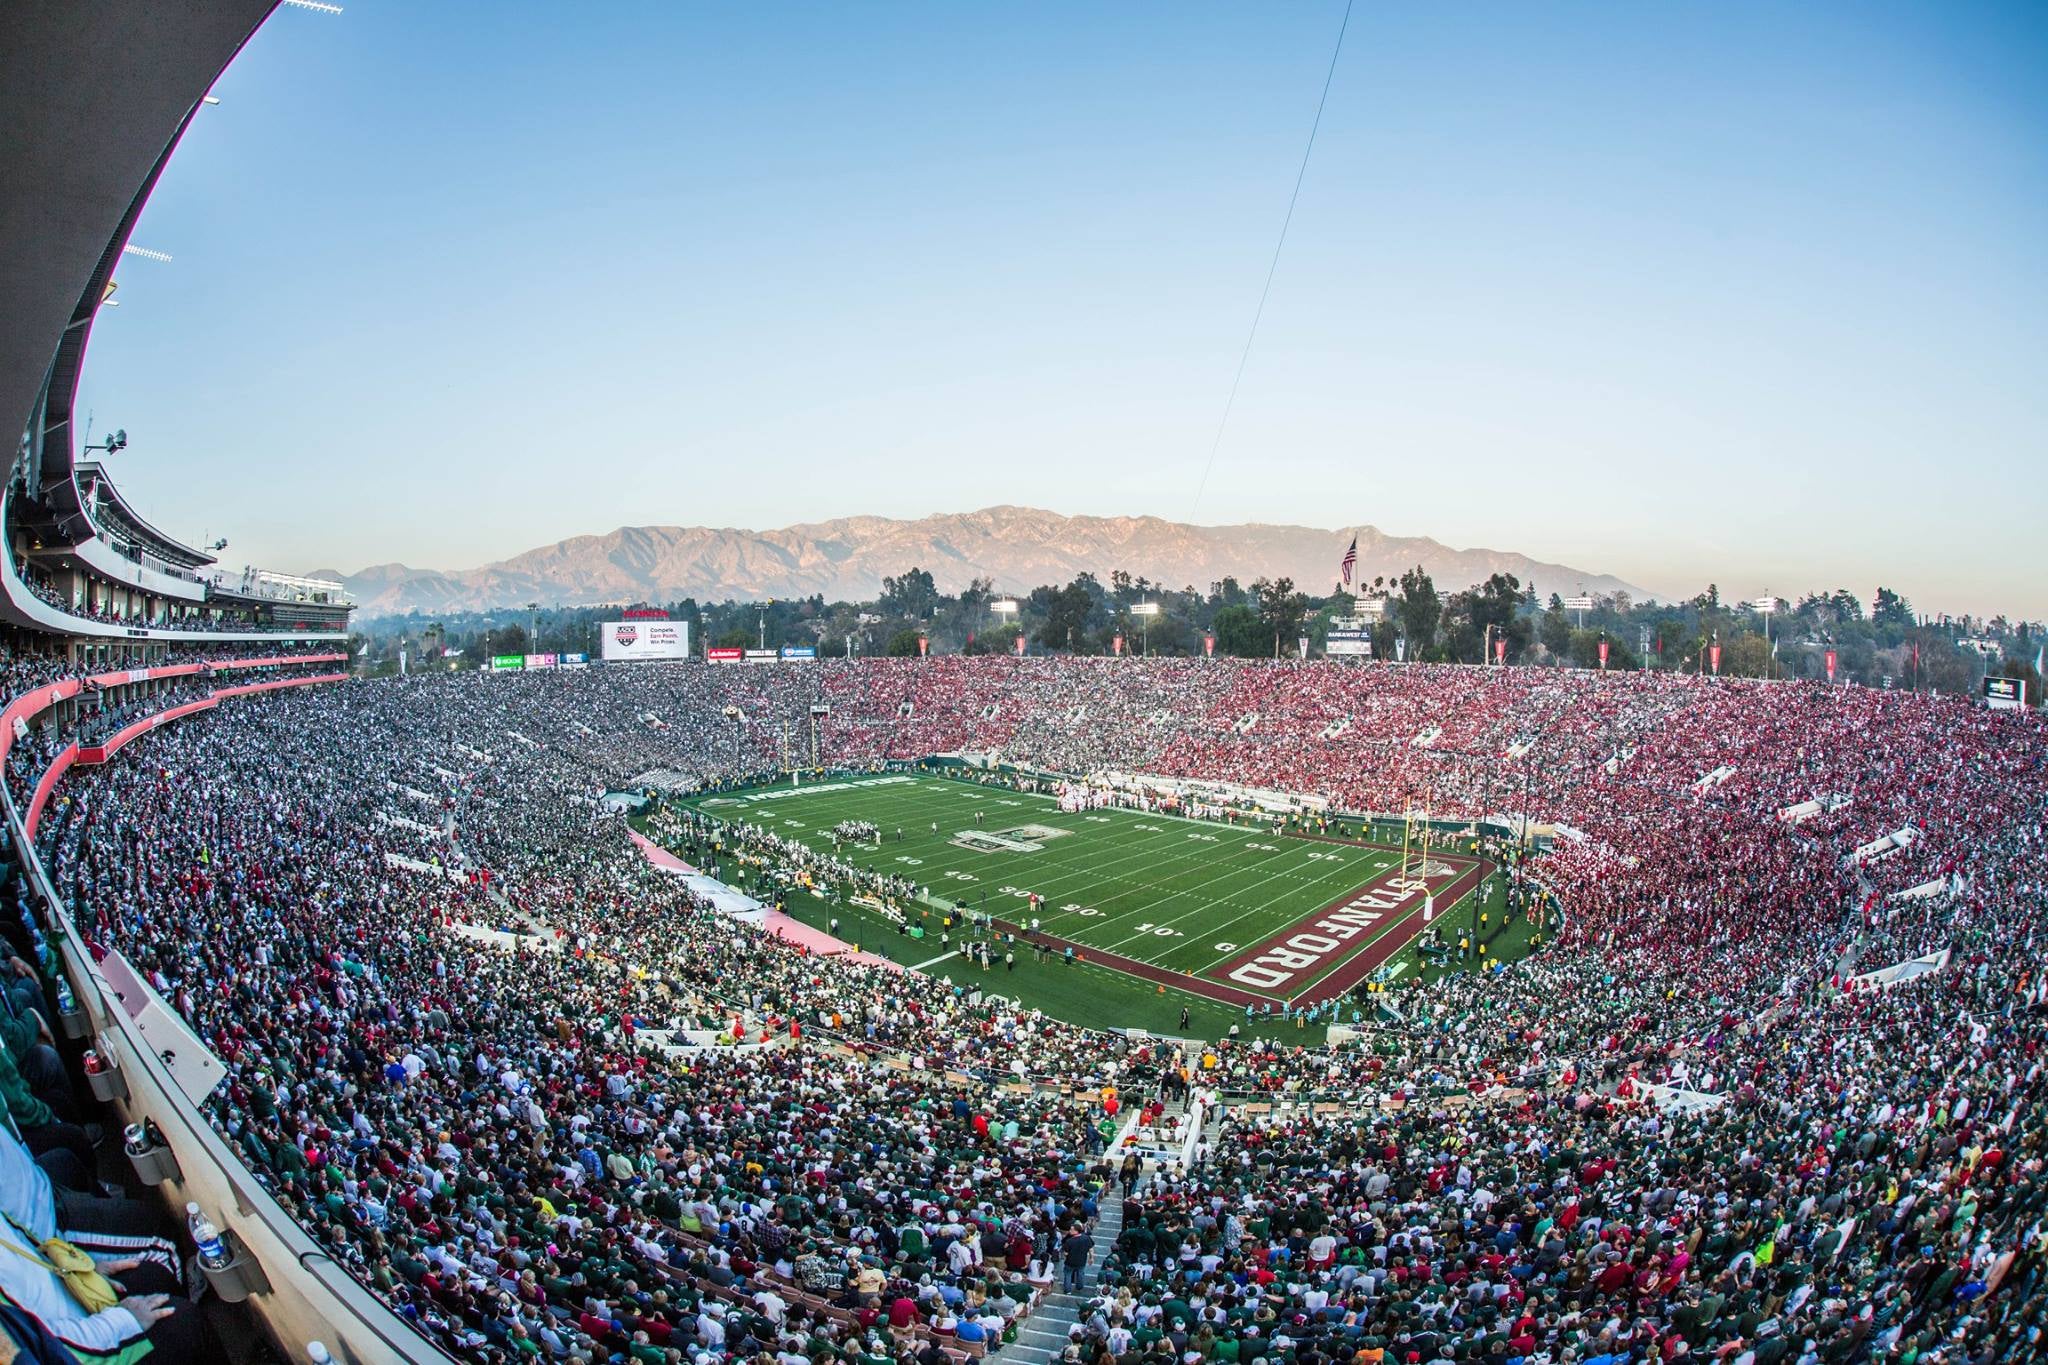 https://www.discoverlosangeles.com/sites/default/files/images/2019-08/100th%20Rose%20Bowl%20Game%20Stanford%20vs%20Michigan%20State.jpg